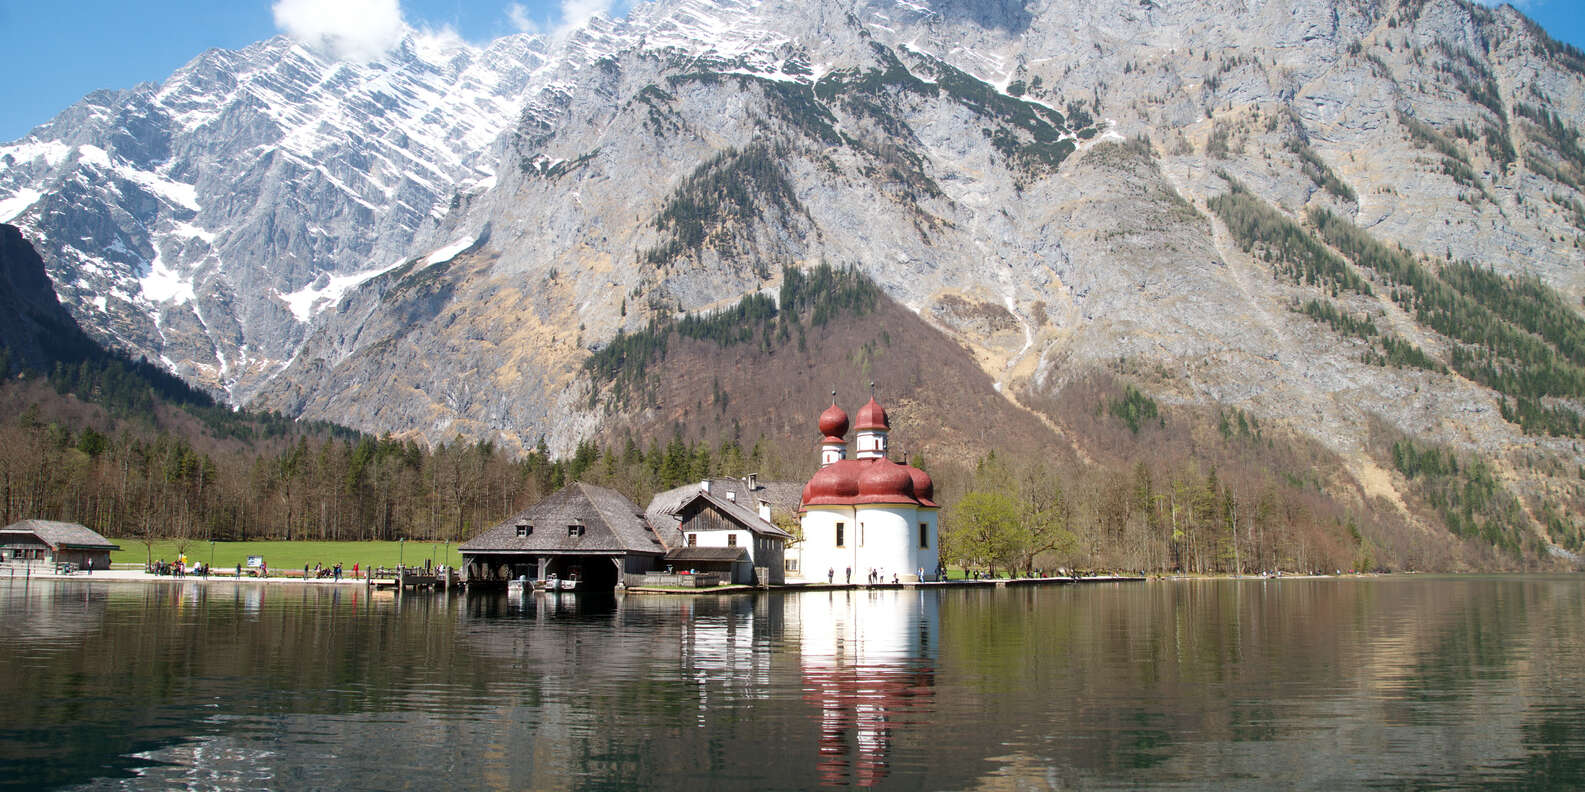 What to do in Berchtesgaden